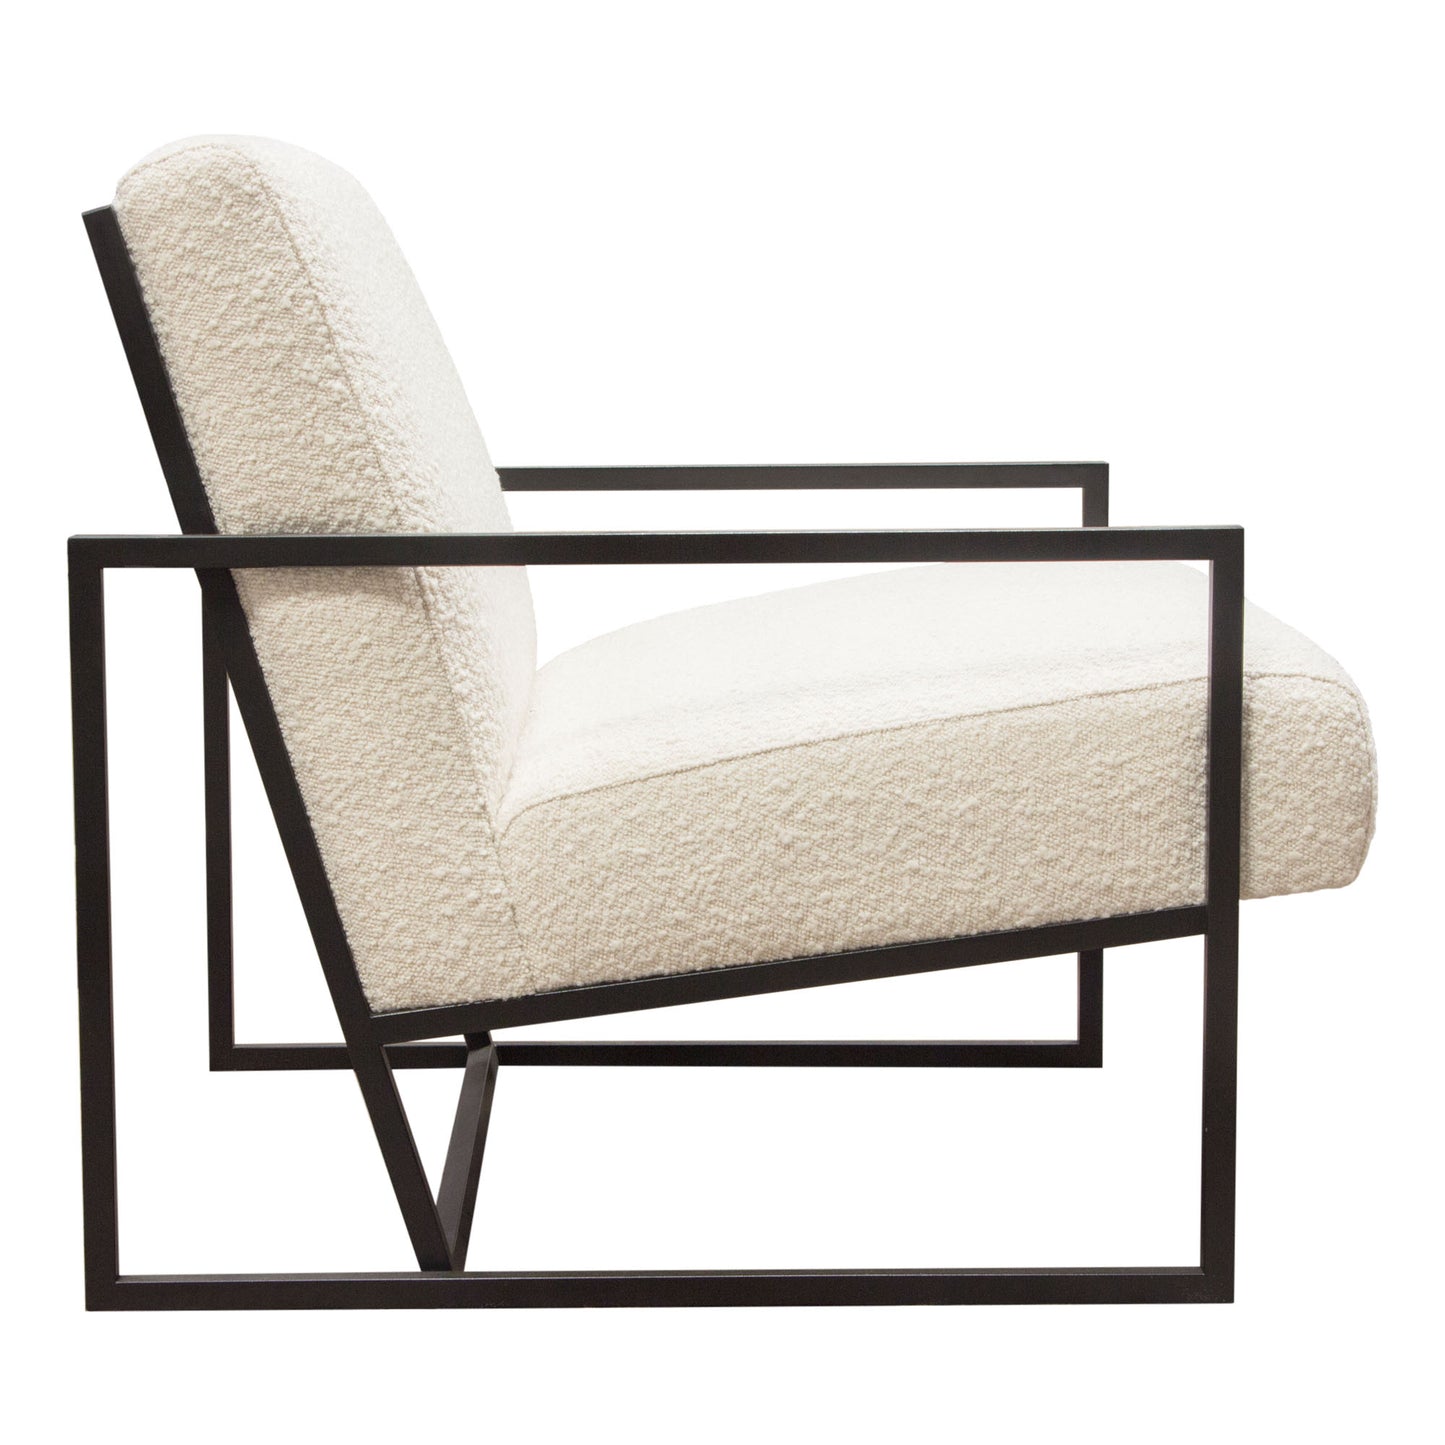 Luxe Accent Chair in Bone Boucle Textured Fabric with Black Powder Coat Frame